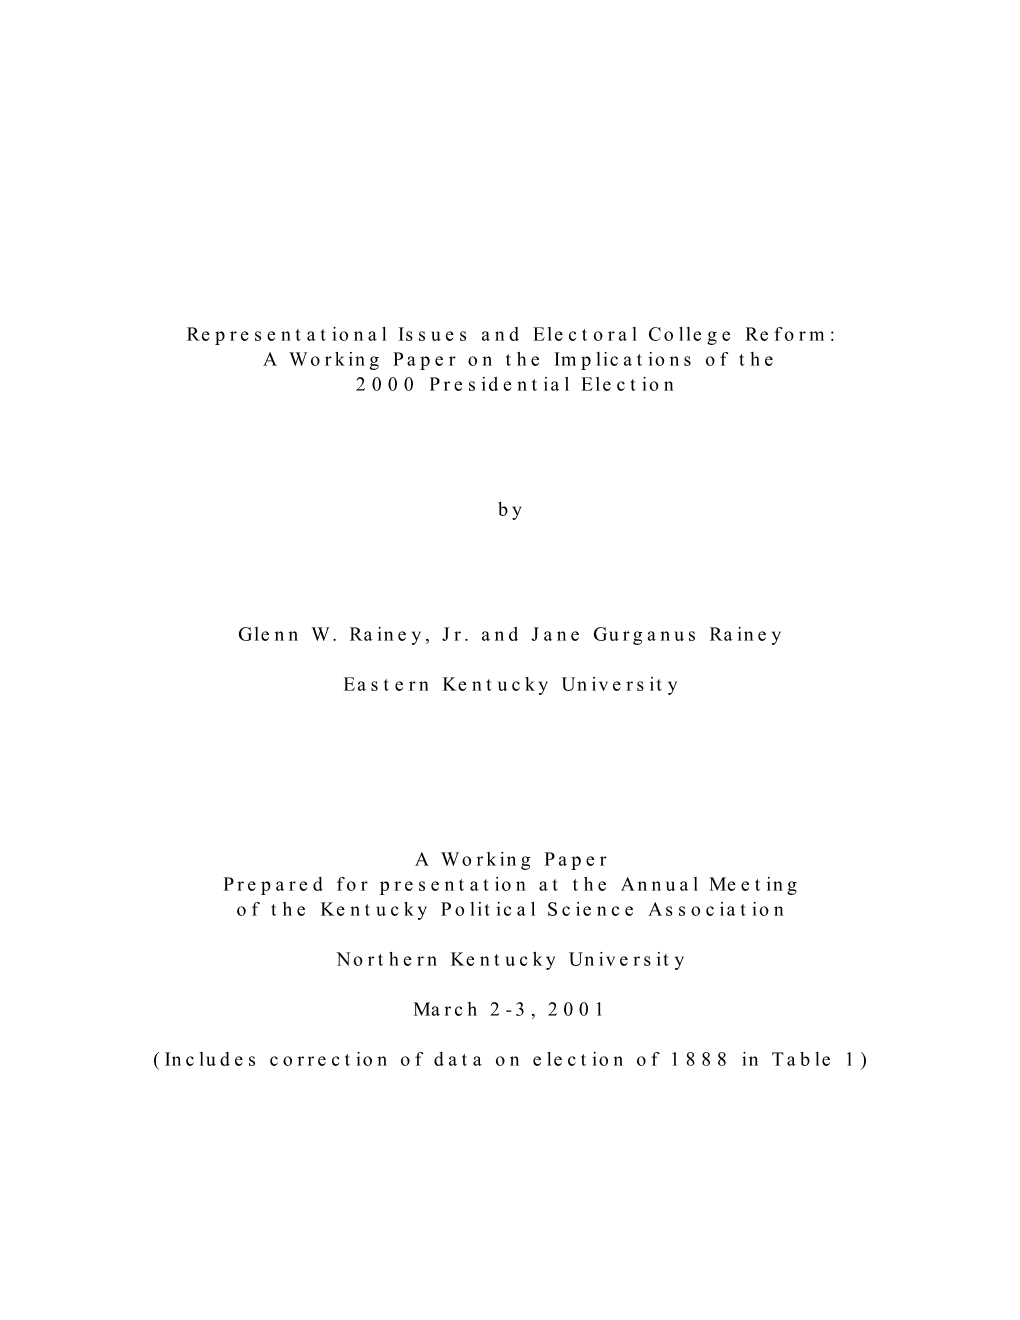 Representational Issues and Electoral College Reform: a Working Paper on the Implications of the 2000 Presidential Election